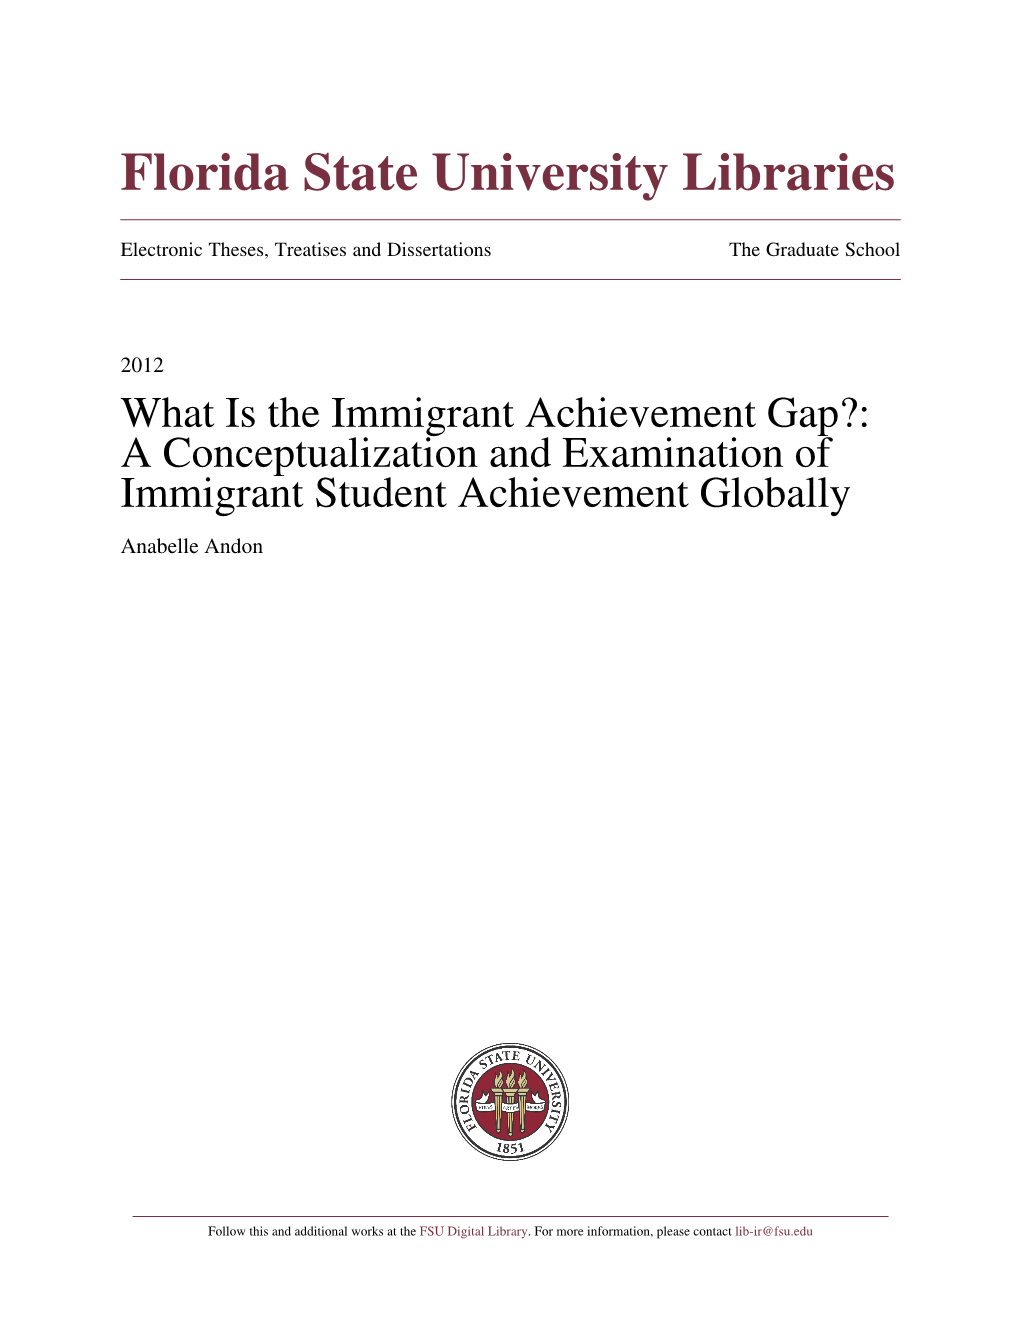 What Is the Immigrant Achievement Gap?: a Conceptualization and Examination of Immigrant Student Achievement Globally Anabelle Andon